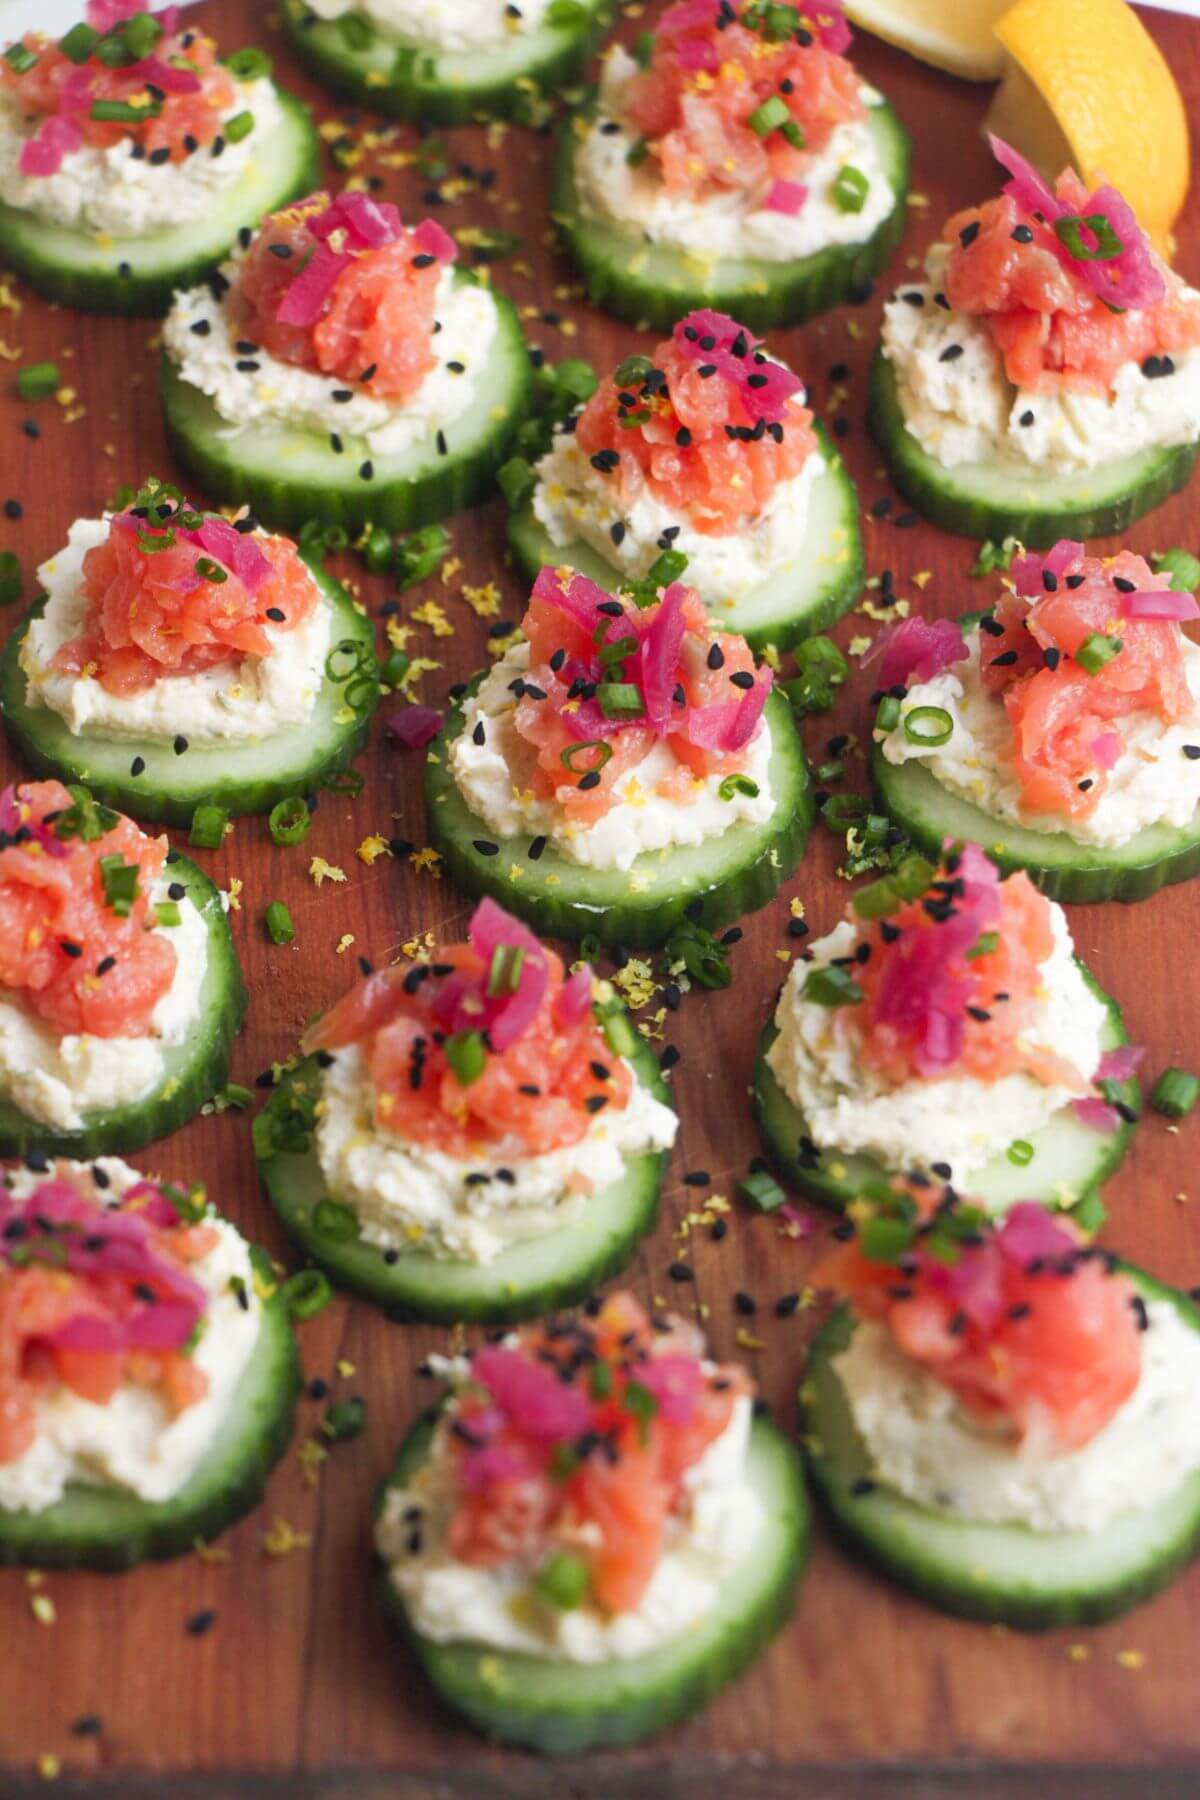 Smoked salmon cucumber bites topped with lemon zest and chives on a wooden board.